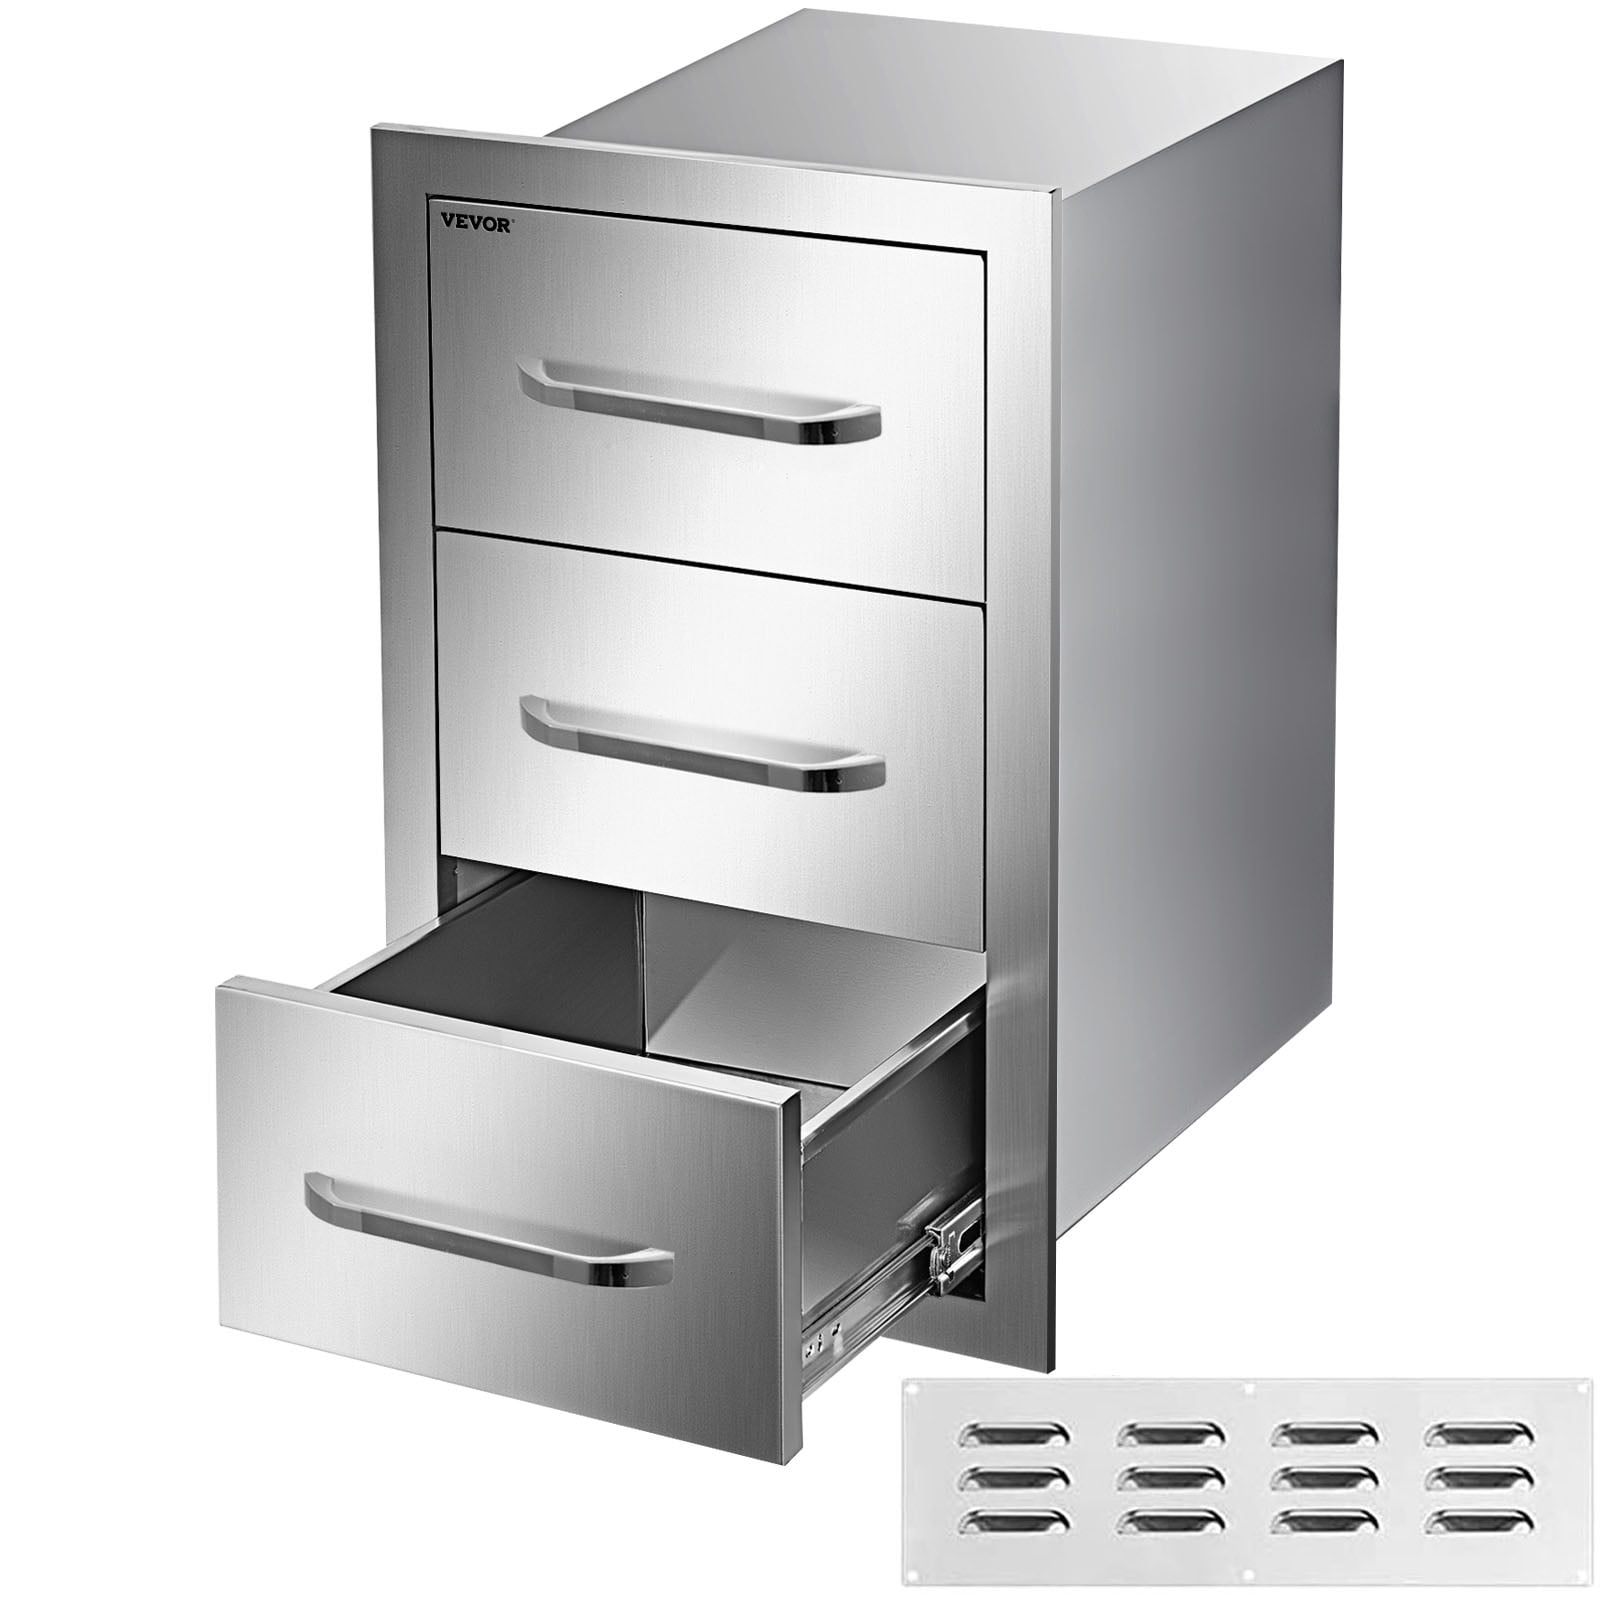 16 W x 21 H x 23 D,Flush Mount for Outdoor Kitchen or BBQ Island yuxiangBBQ Outdoor Kitchen Drawers Stainless Steel Triple Drawer 